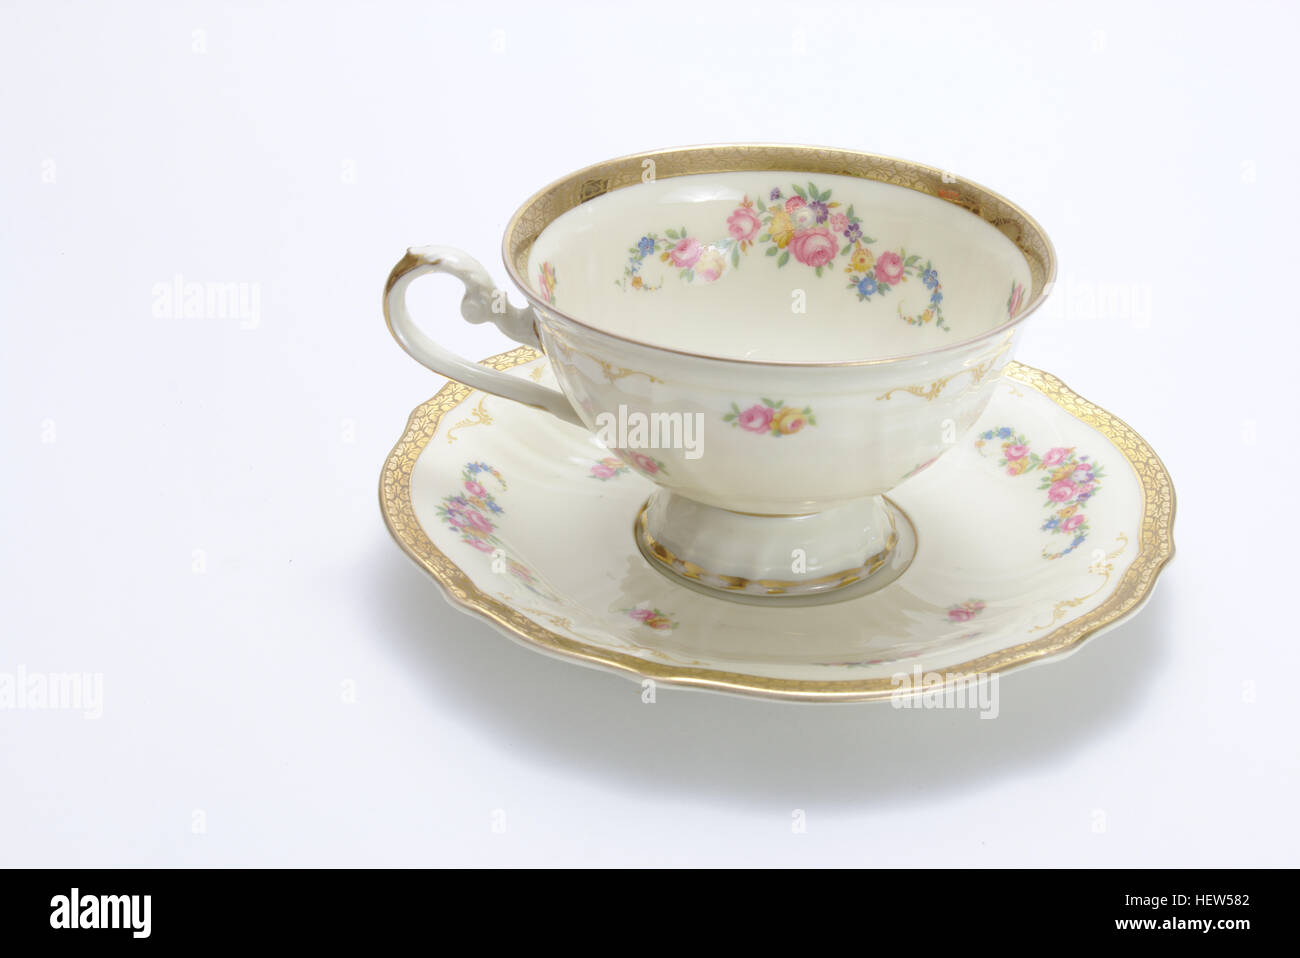 Decorate porcelain teacup on white background Stock Photo